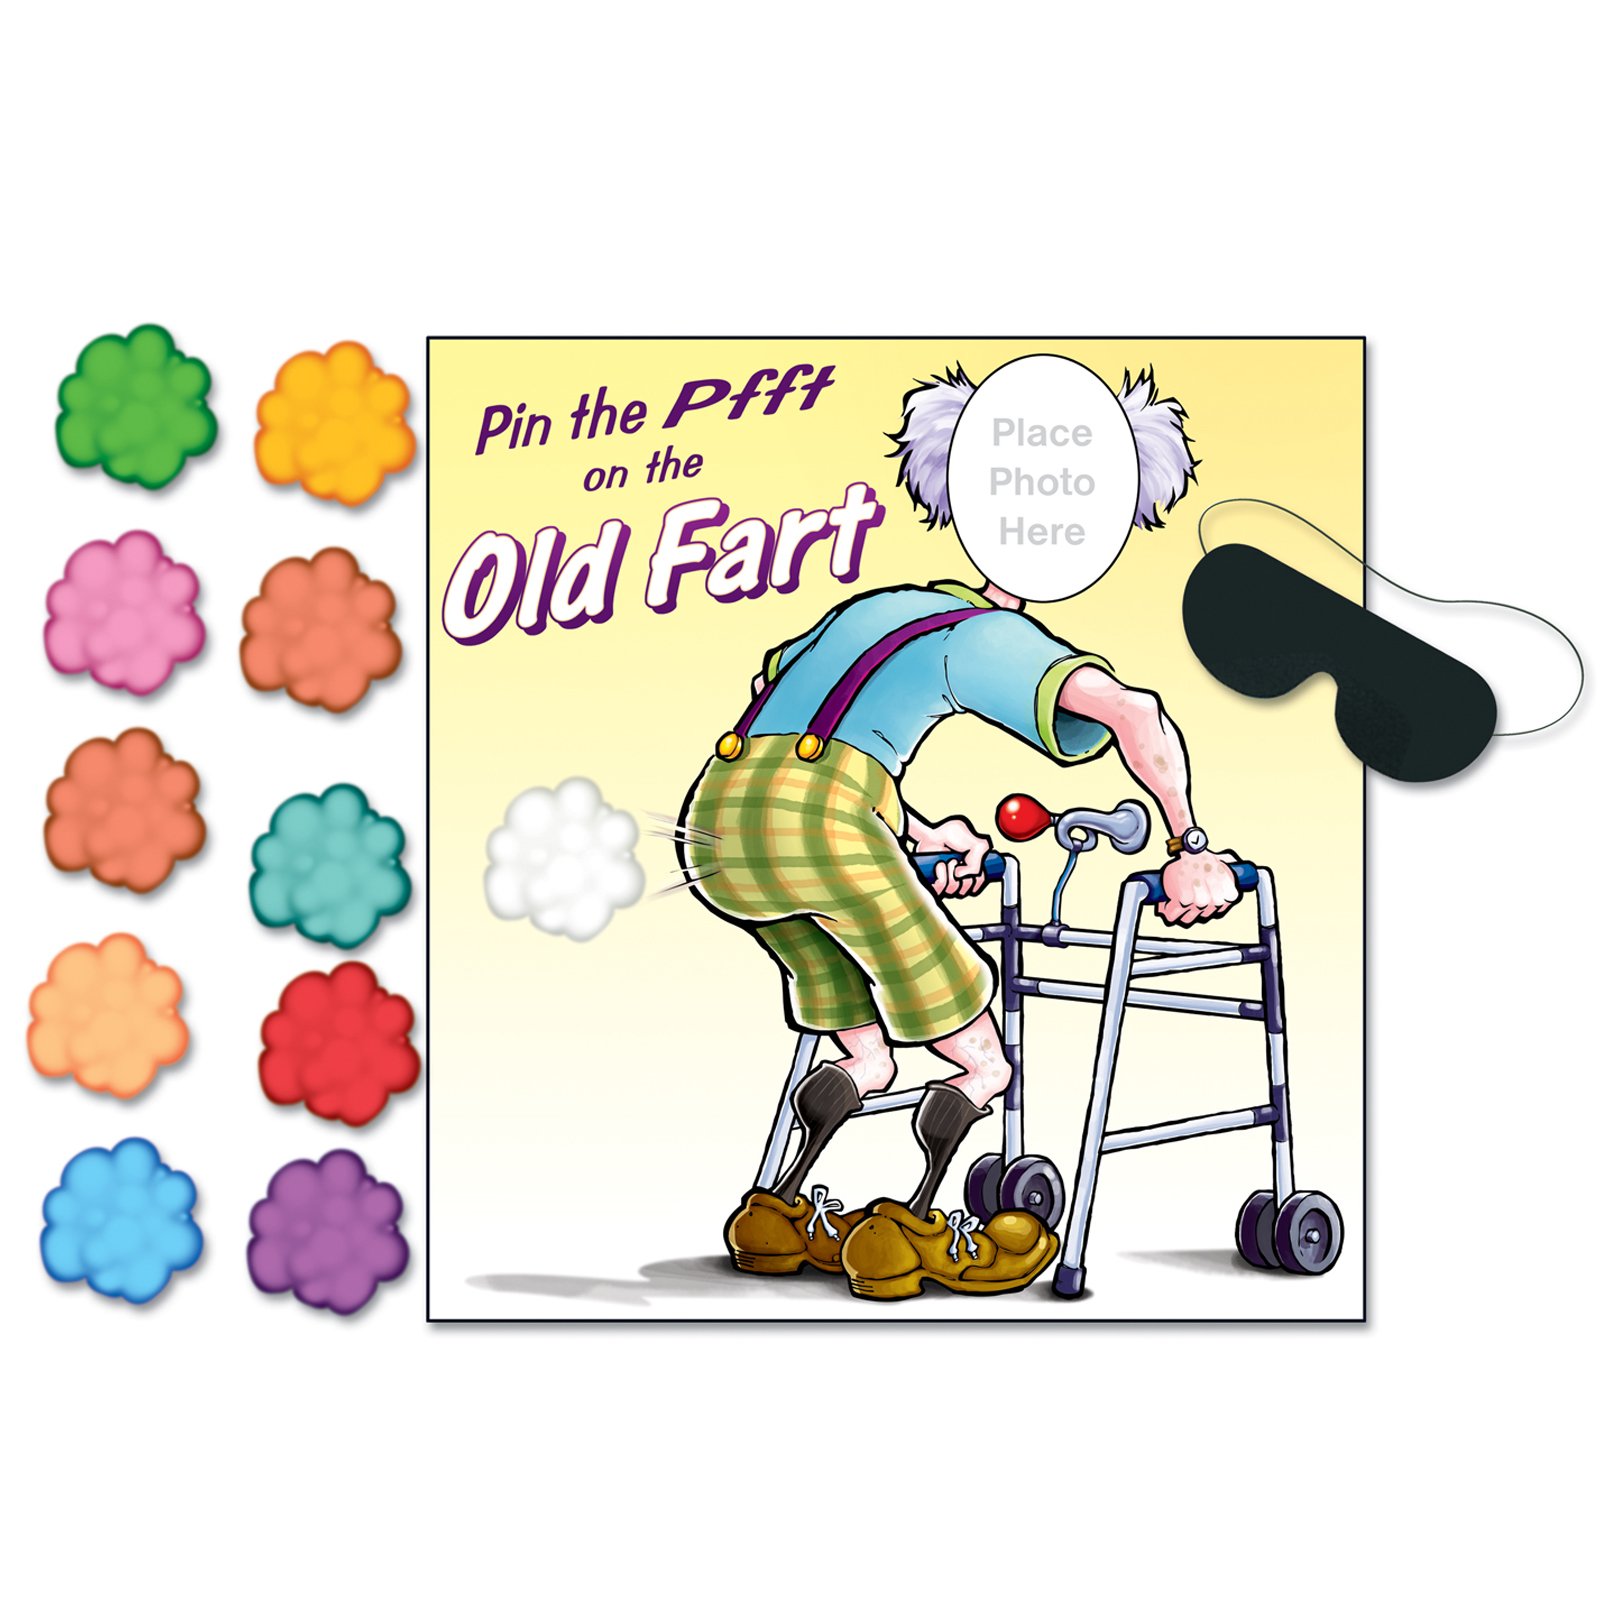 Old Fart Game "Pin the PFFT"